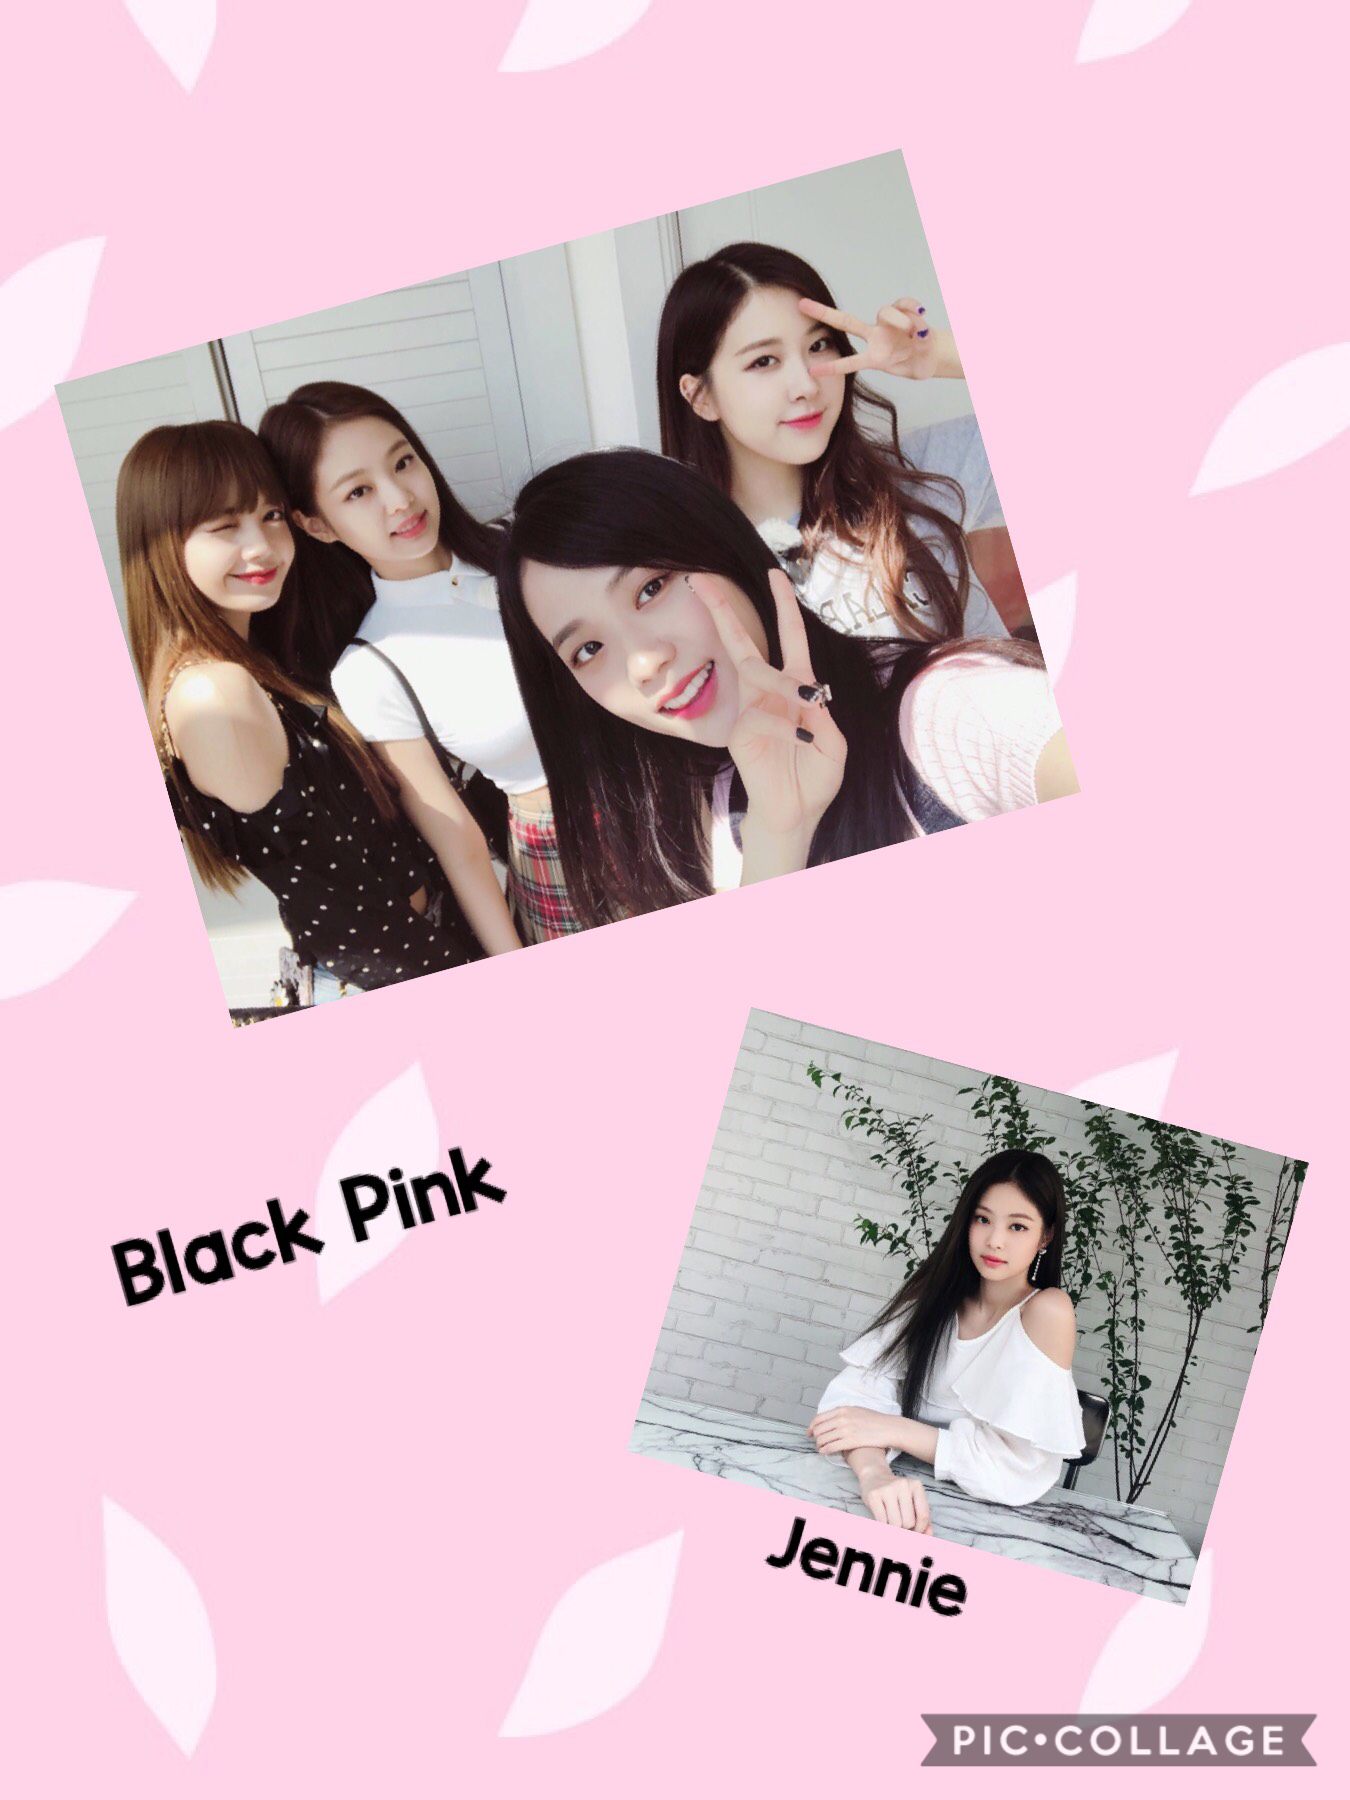 The Best BlackPink Awesome!